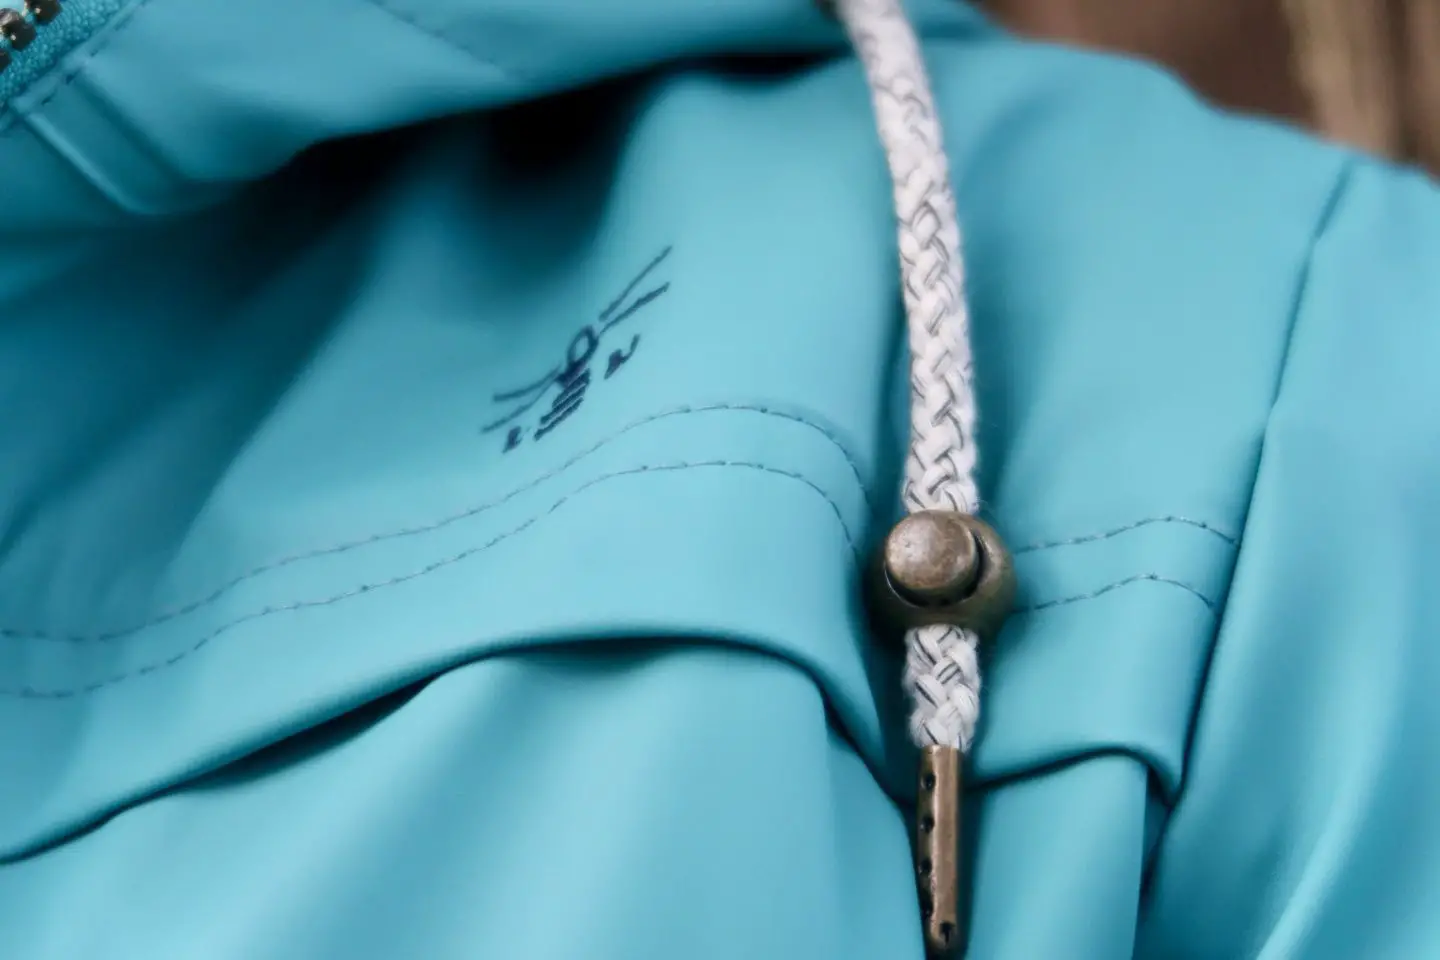 A close up of the Bowline Jacket from Lighthouse Clothing in Teal. It shows a shoulder with a cord and the Lighthouse Clothing symbol